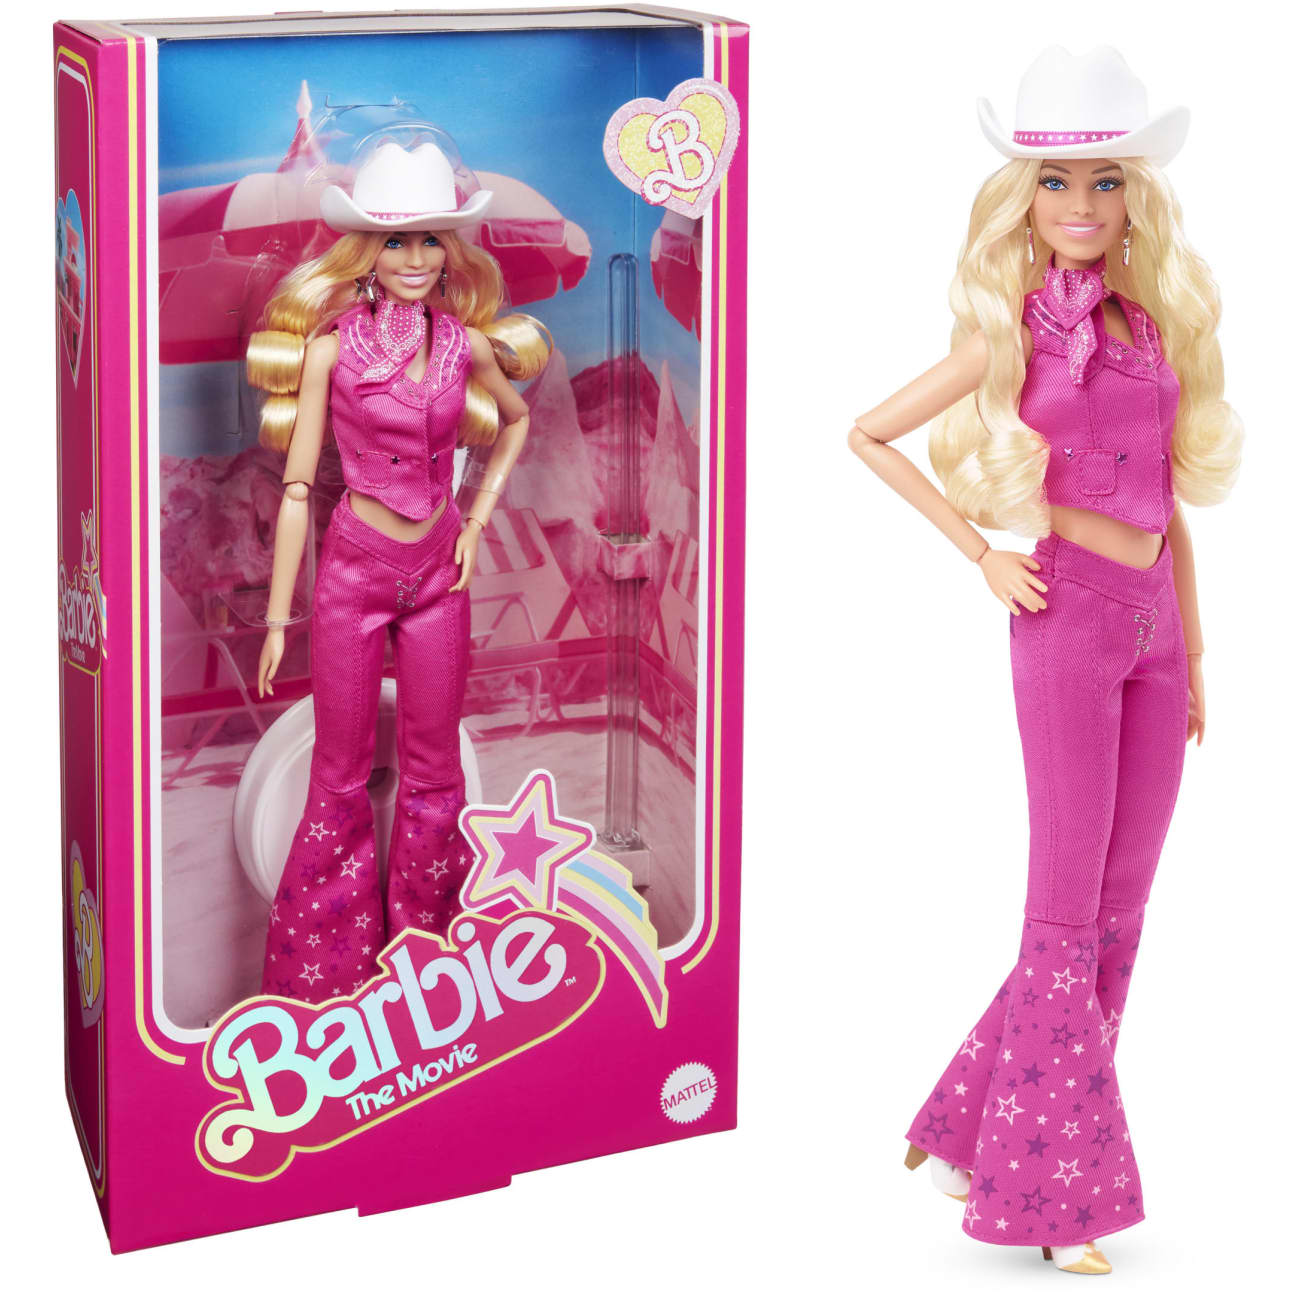 Barbie the Movie Collectible Doll, Margot Robbie As Barbie In Pink Western Outfit by Mattel -Mattel - India - www.superherotoystore.com